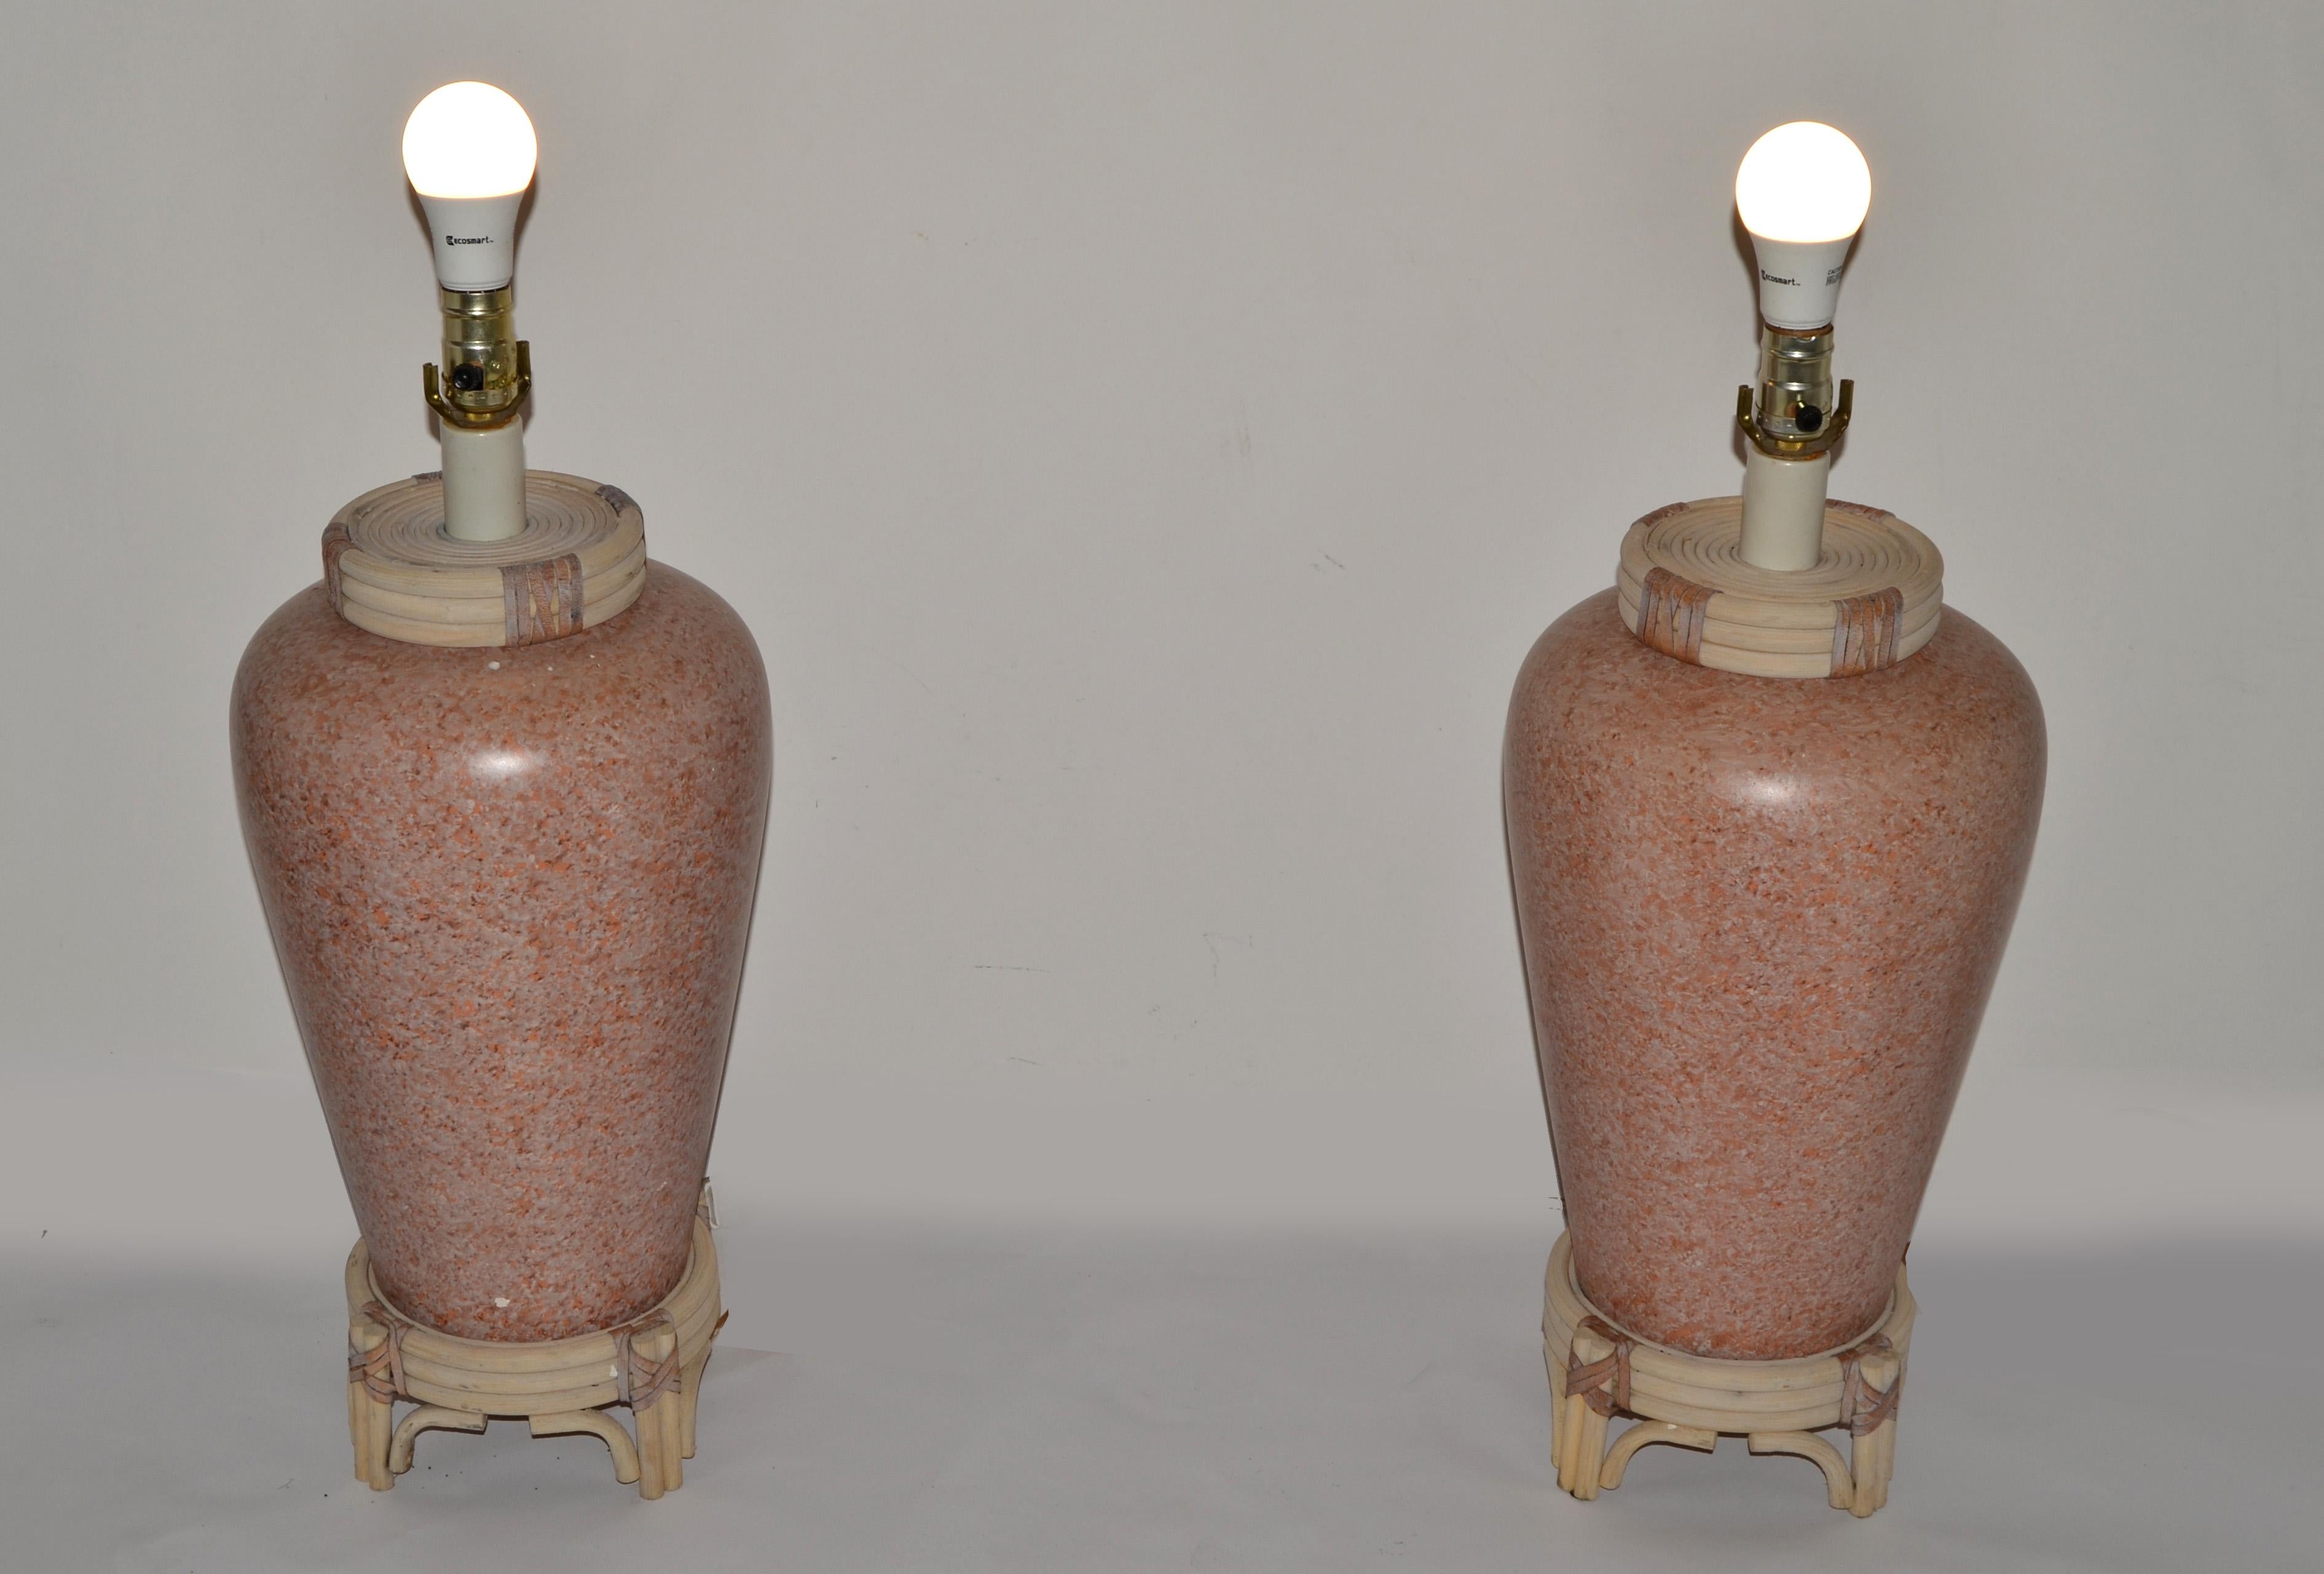 Beautiful Pair of Pink Terrazzo Style Ceramic Table Lamps with handwoven Bamboo Decor and Taupe Leather Accent.
Asian Chinoiserie Style with a touch of McGuire Manner of binding the Bamboo with the Leather.
US Wiring and each Lamp takes a regular or